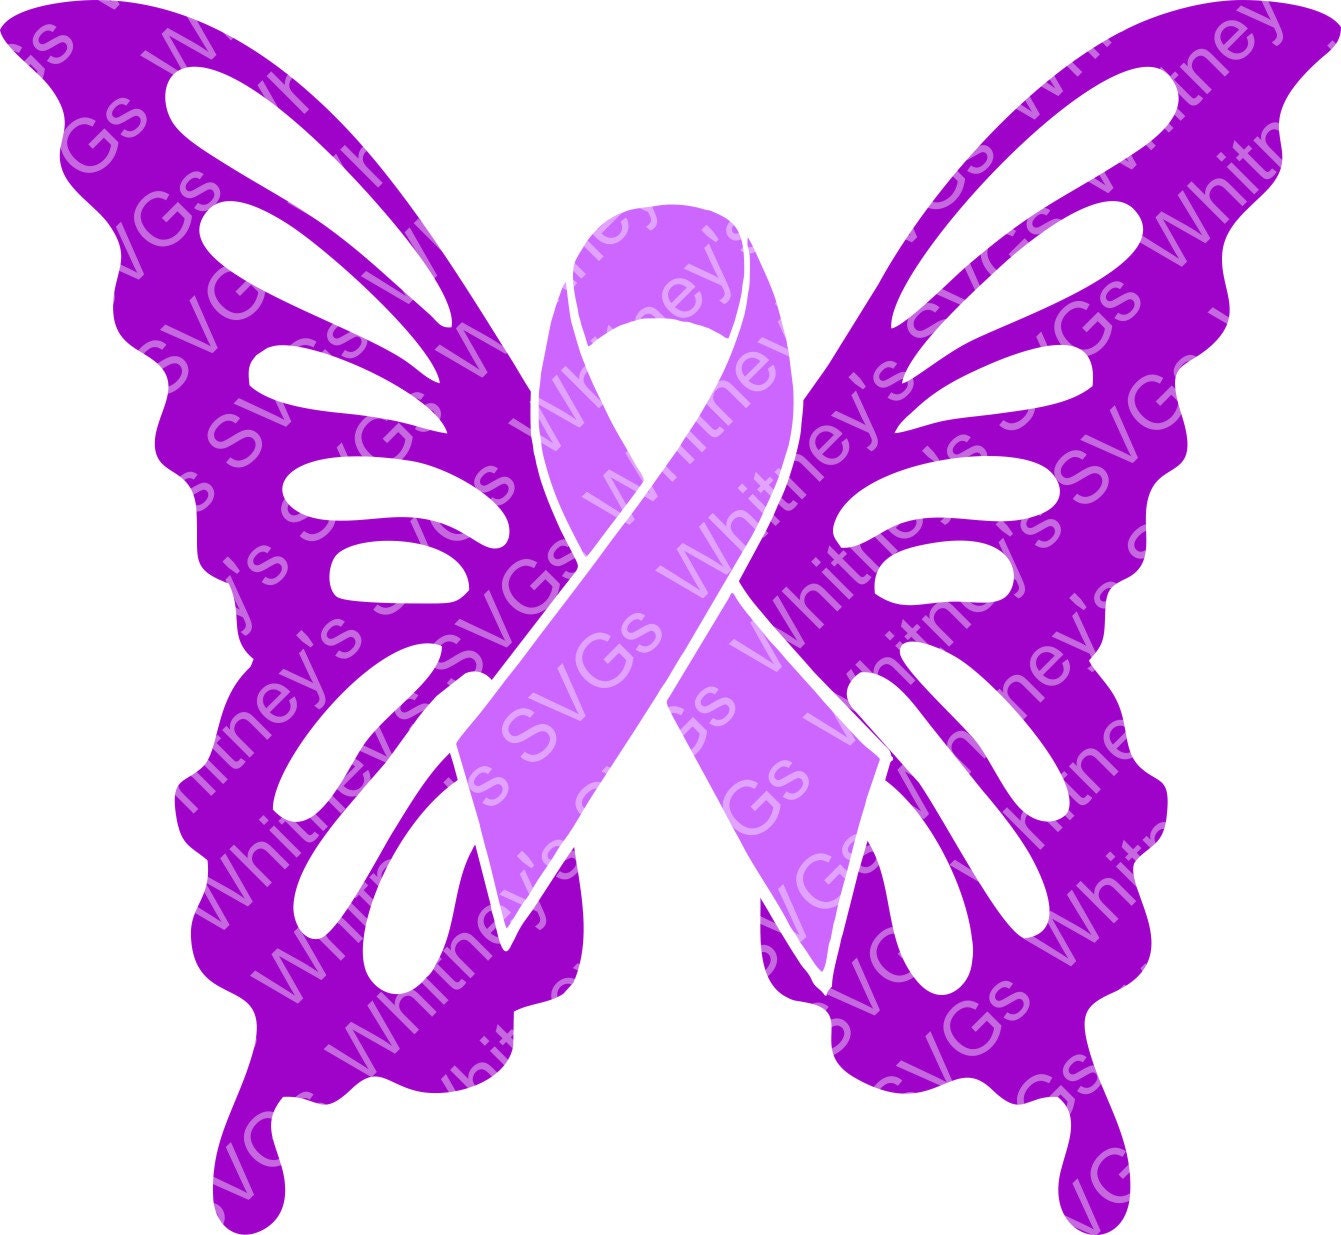 Download Lupus Awareness Butterfly Now With 2 Layers Svg Dxf Cutting Etsy